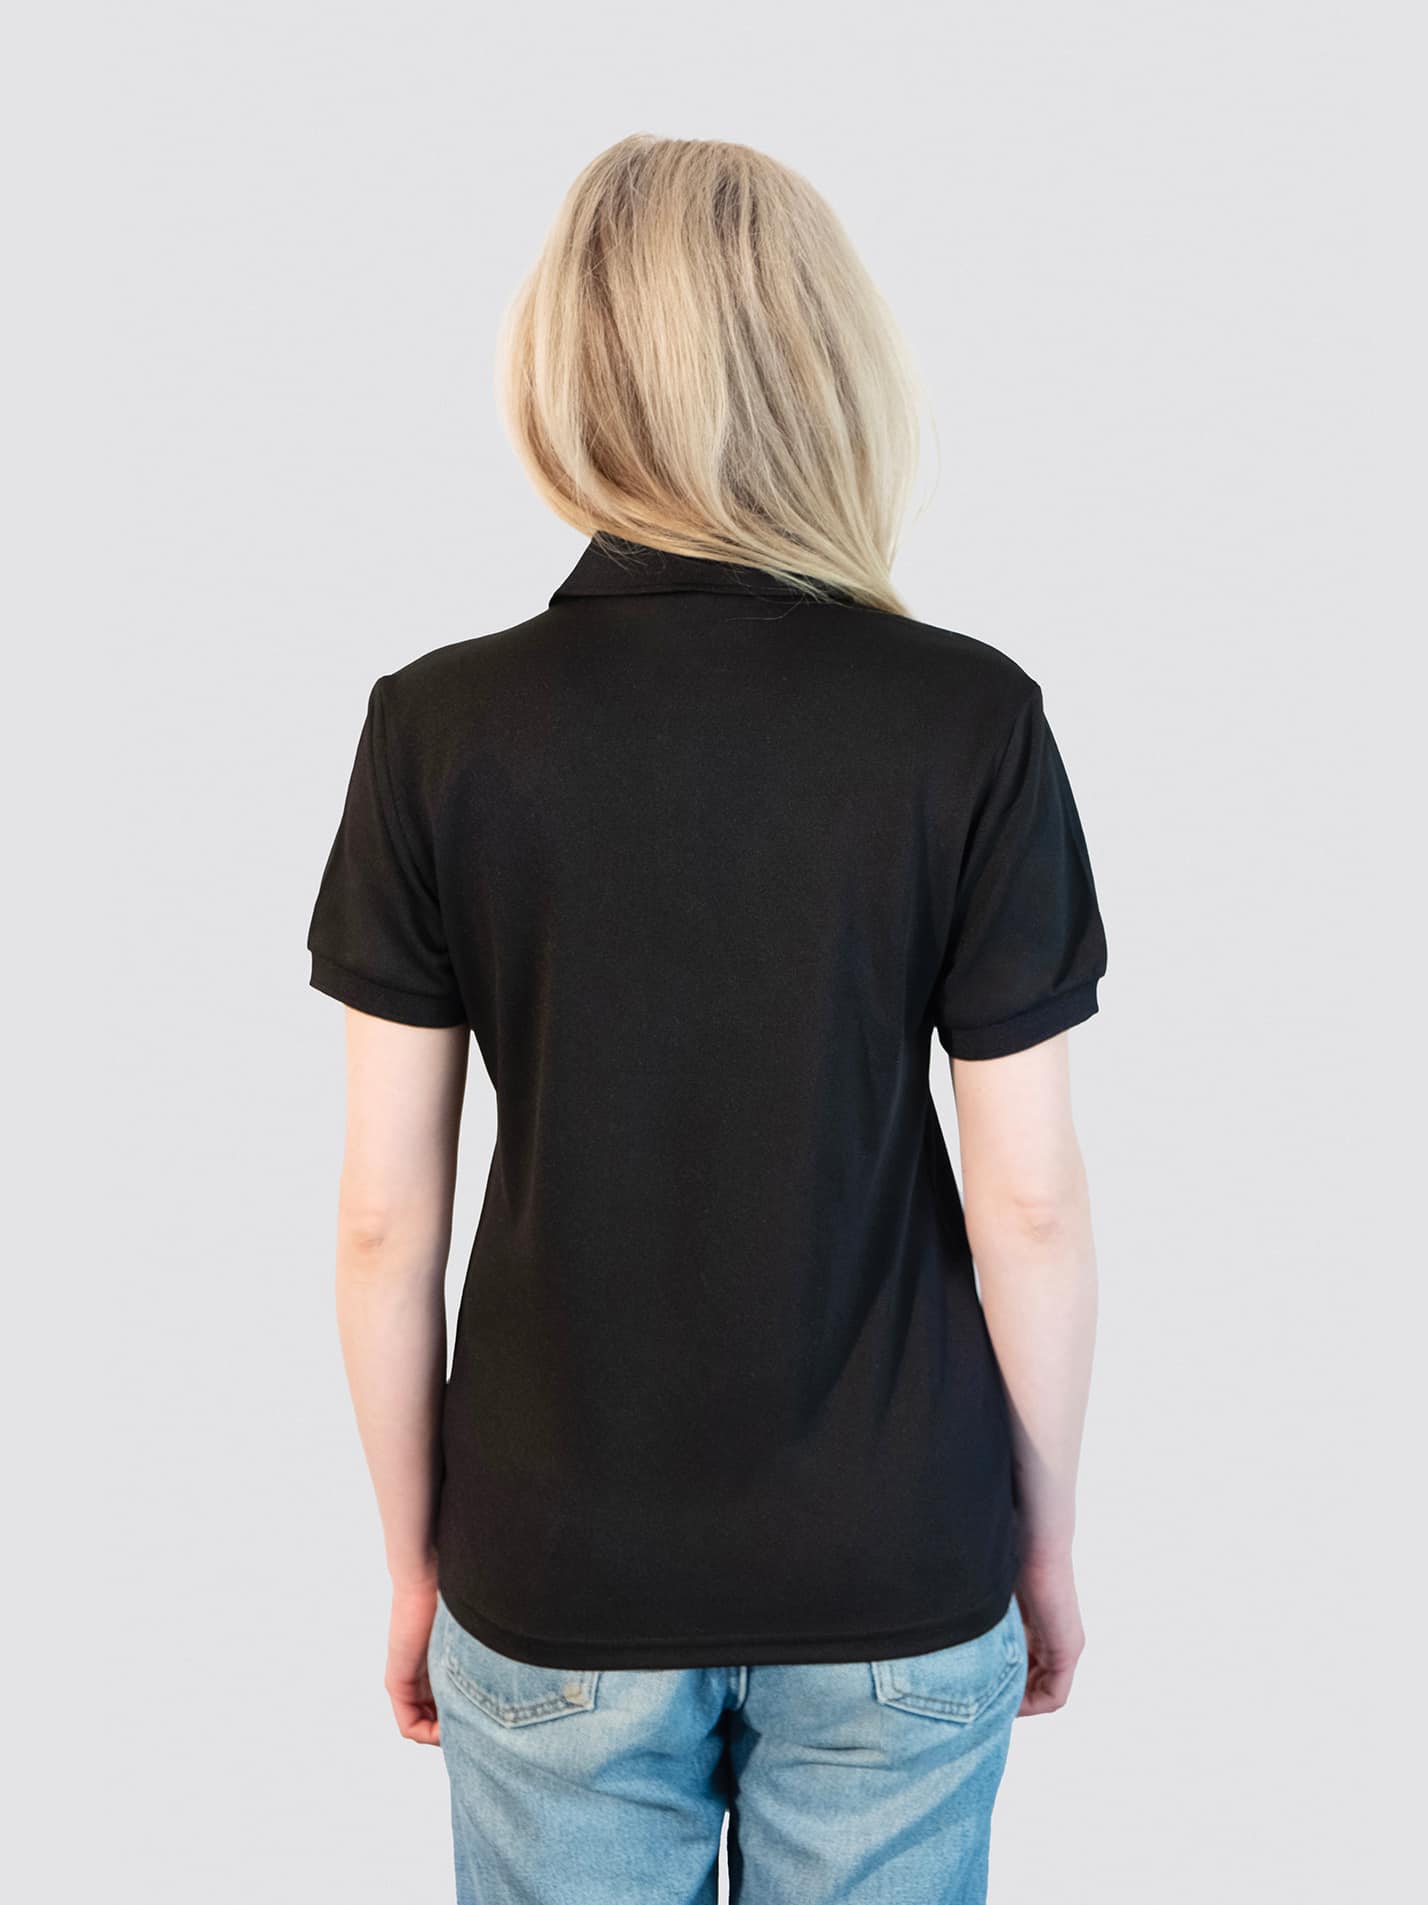 Lady Margaret Hall Oxford Sustainable Ladies Polo Shirt